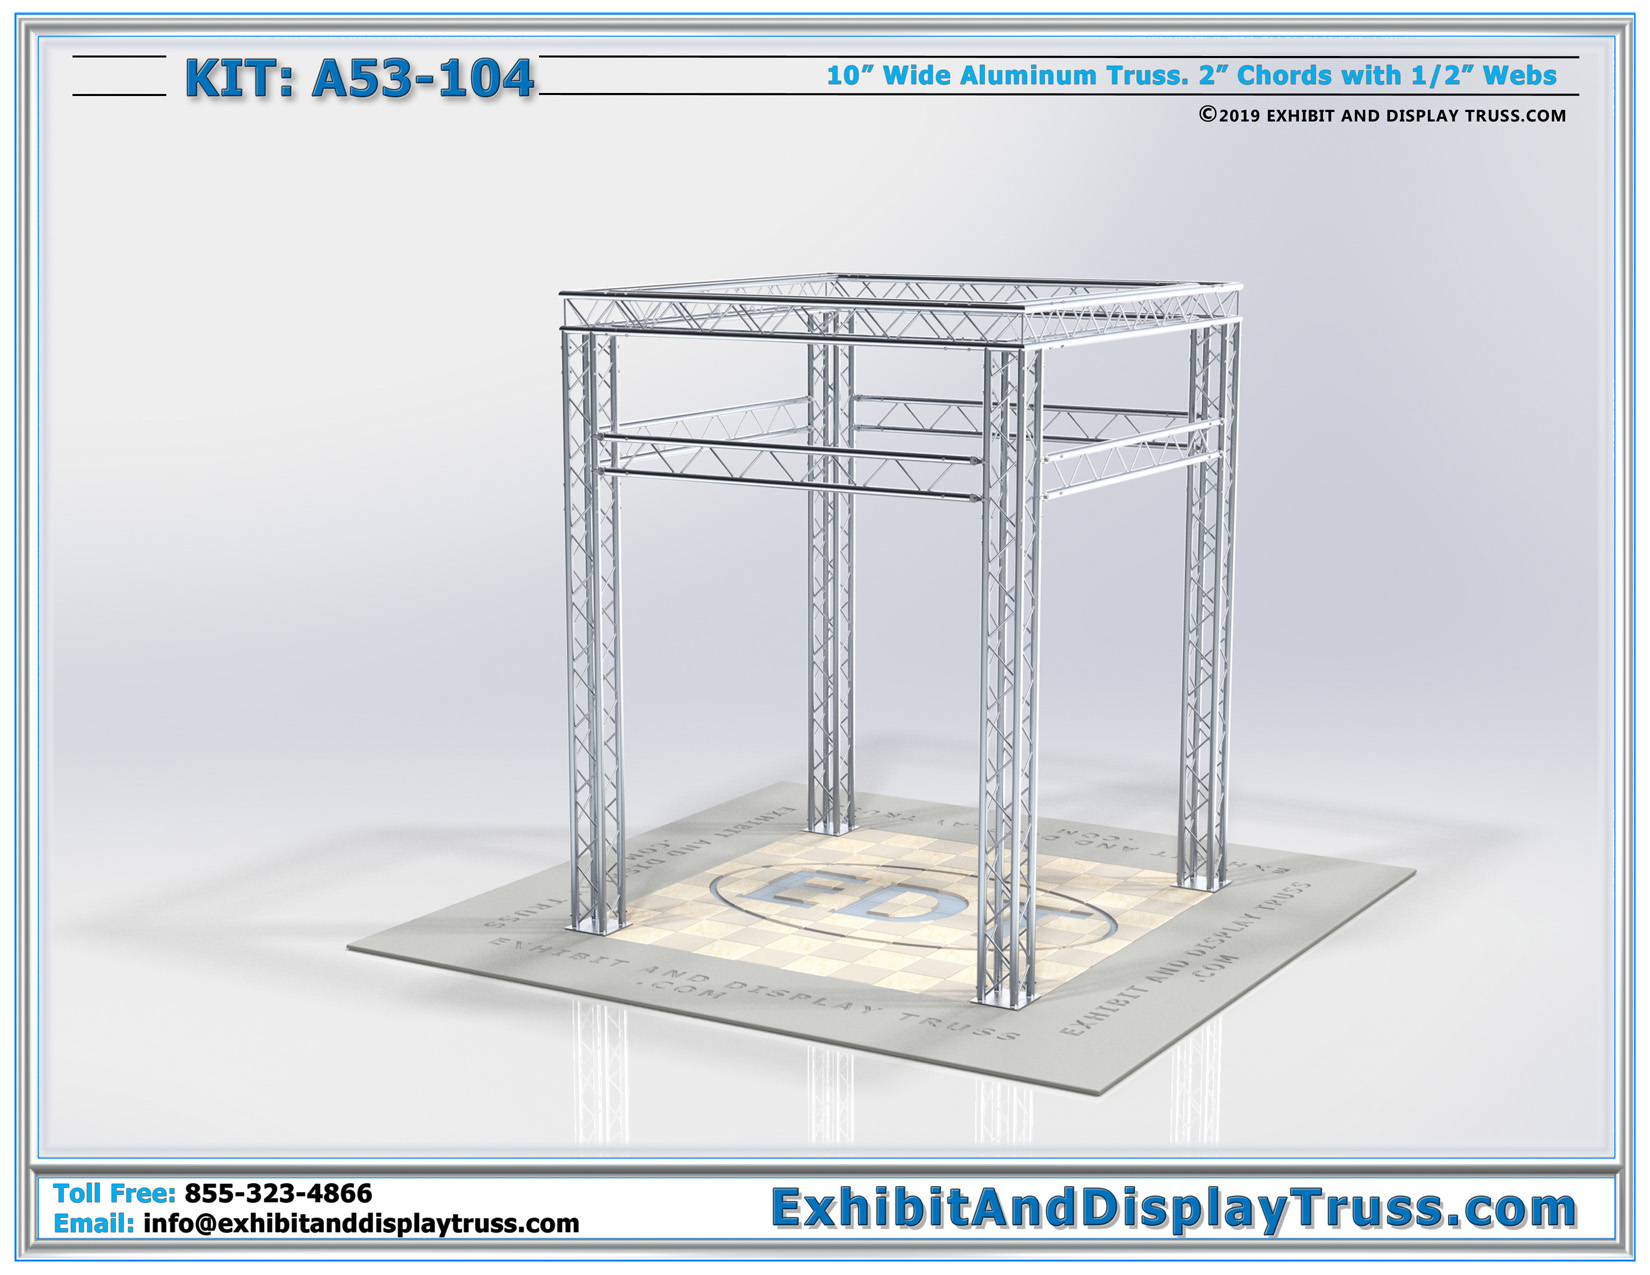 Kit: A53-104 / Modular Truss Perimeter Booth with Decorative Overhead 360 Degree Signage Area